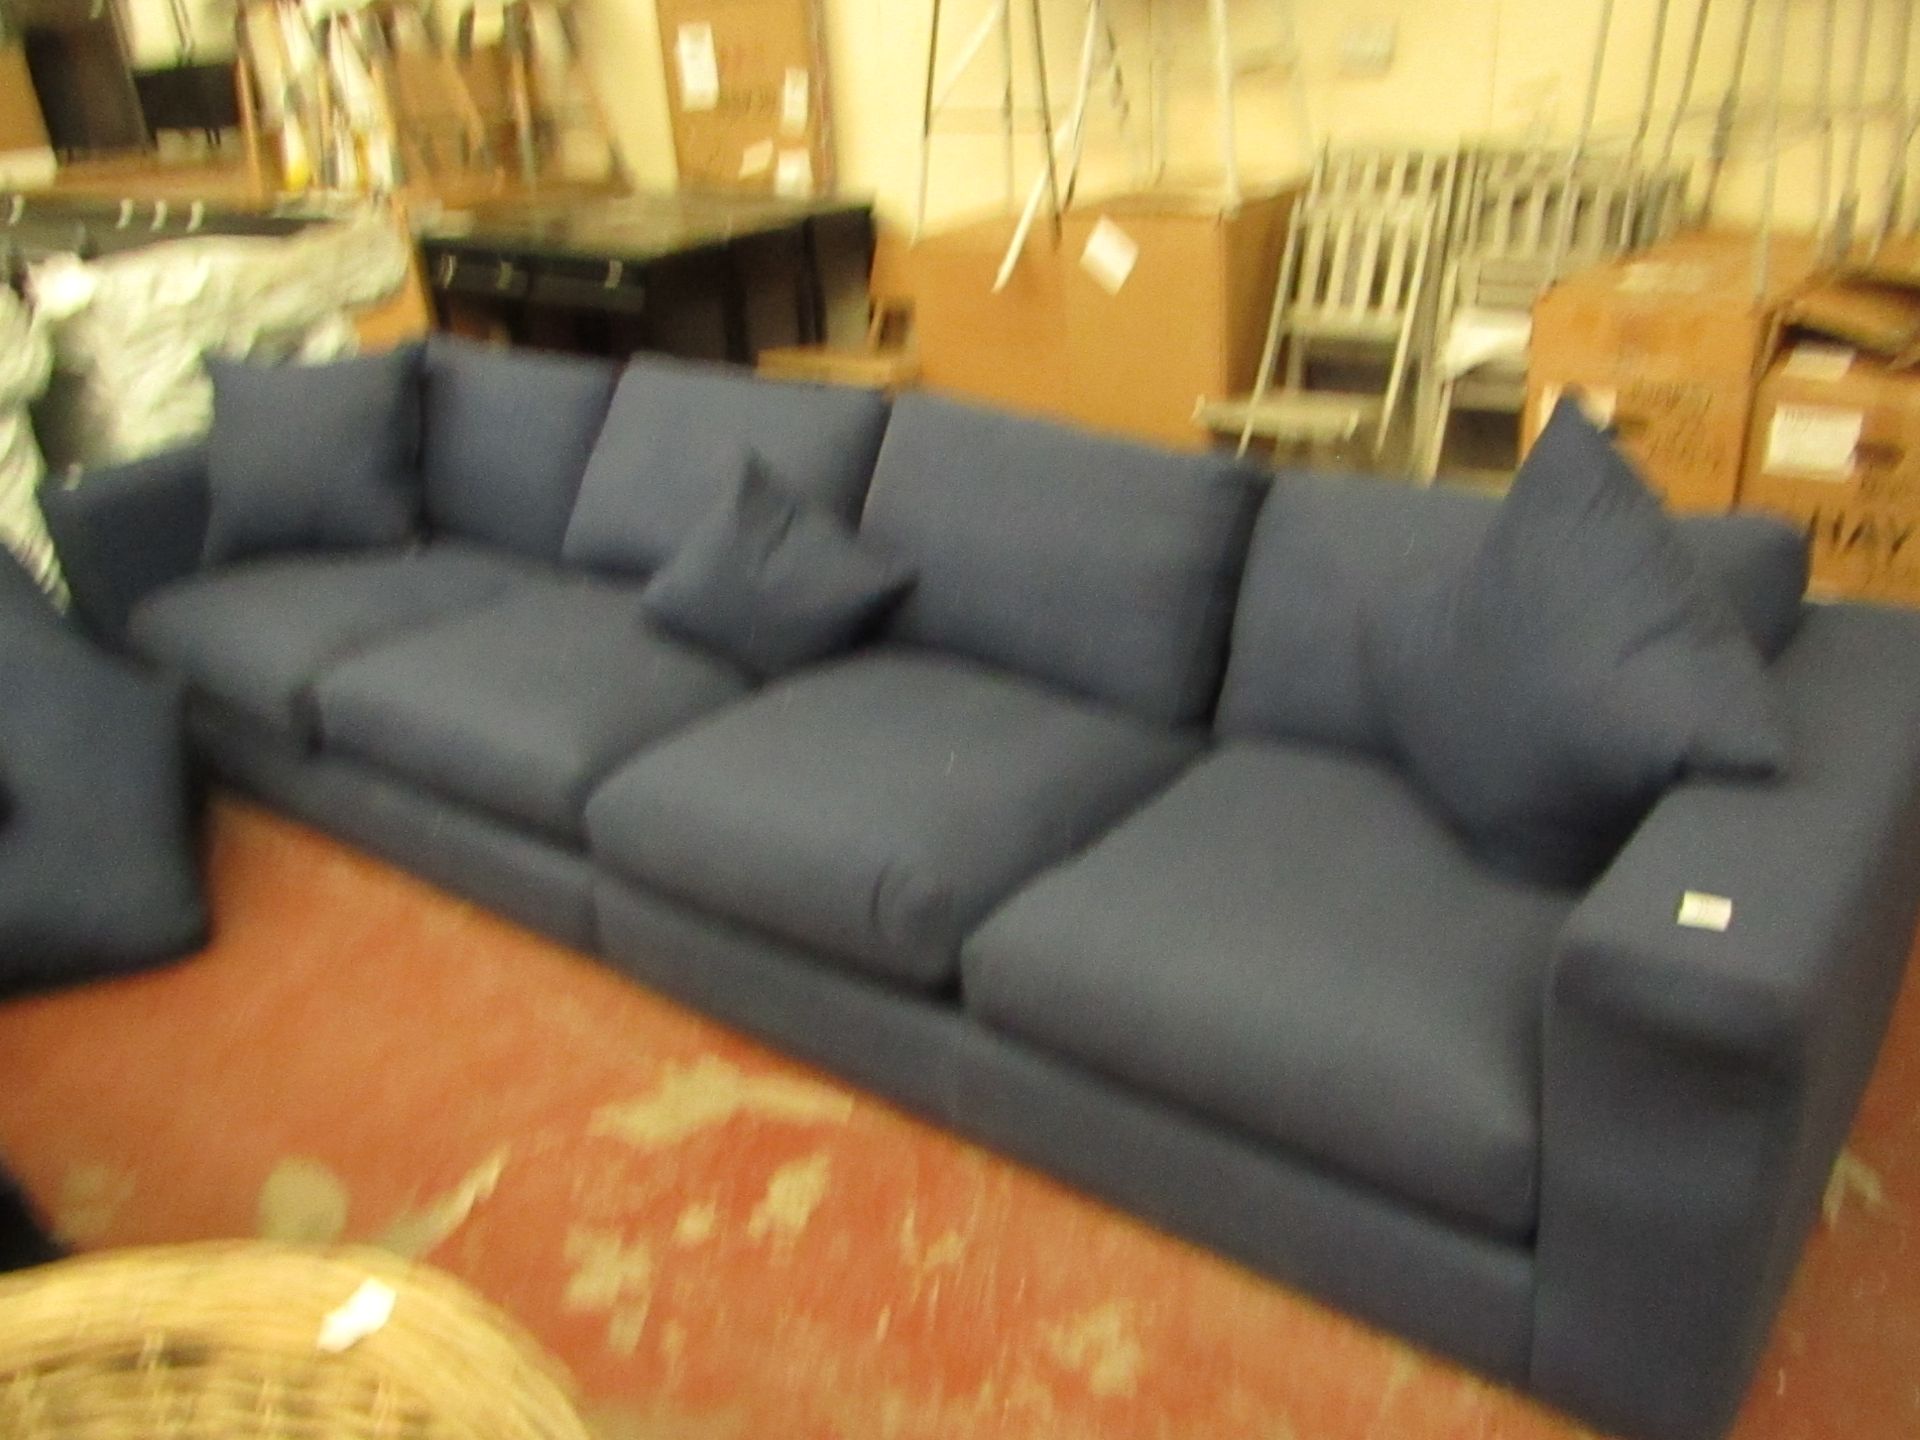 | 1 X | SWOON BLUE COLOURED SOFA | LOOKS UNUSED (NO GUARANTEE), WE ARE UNSURE IF THE SOFA IS 2 PARTS